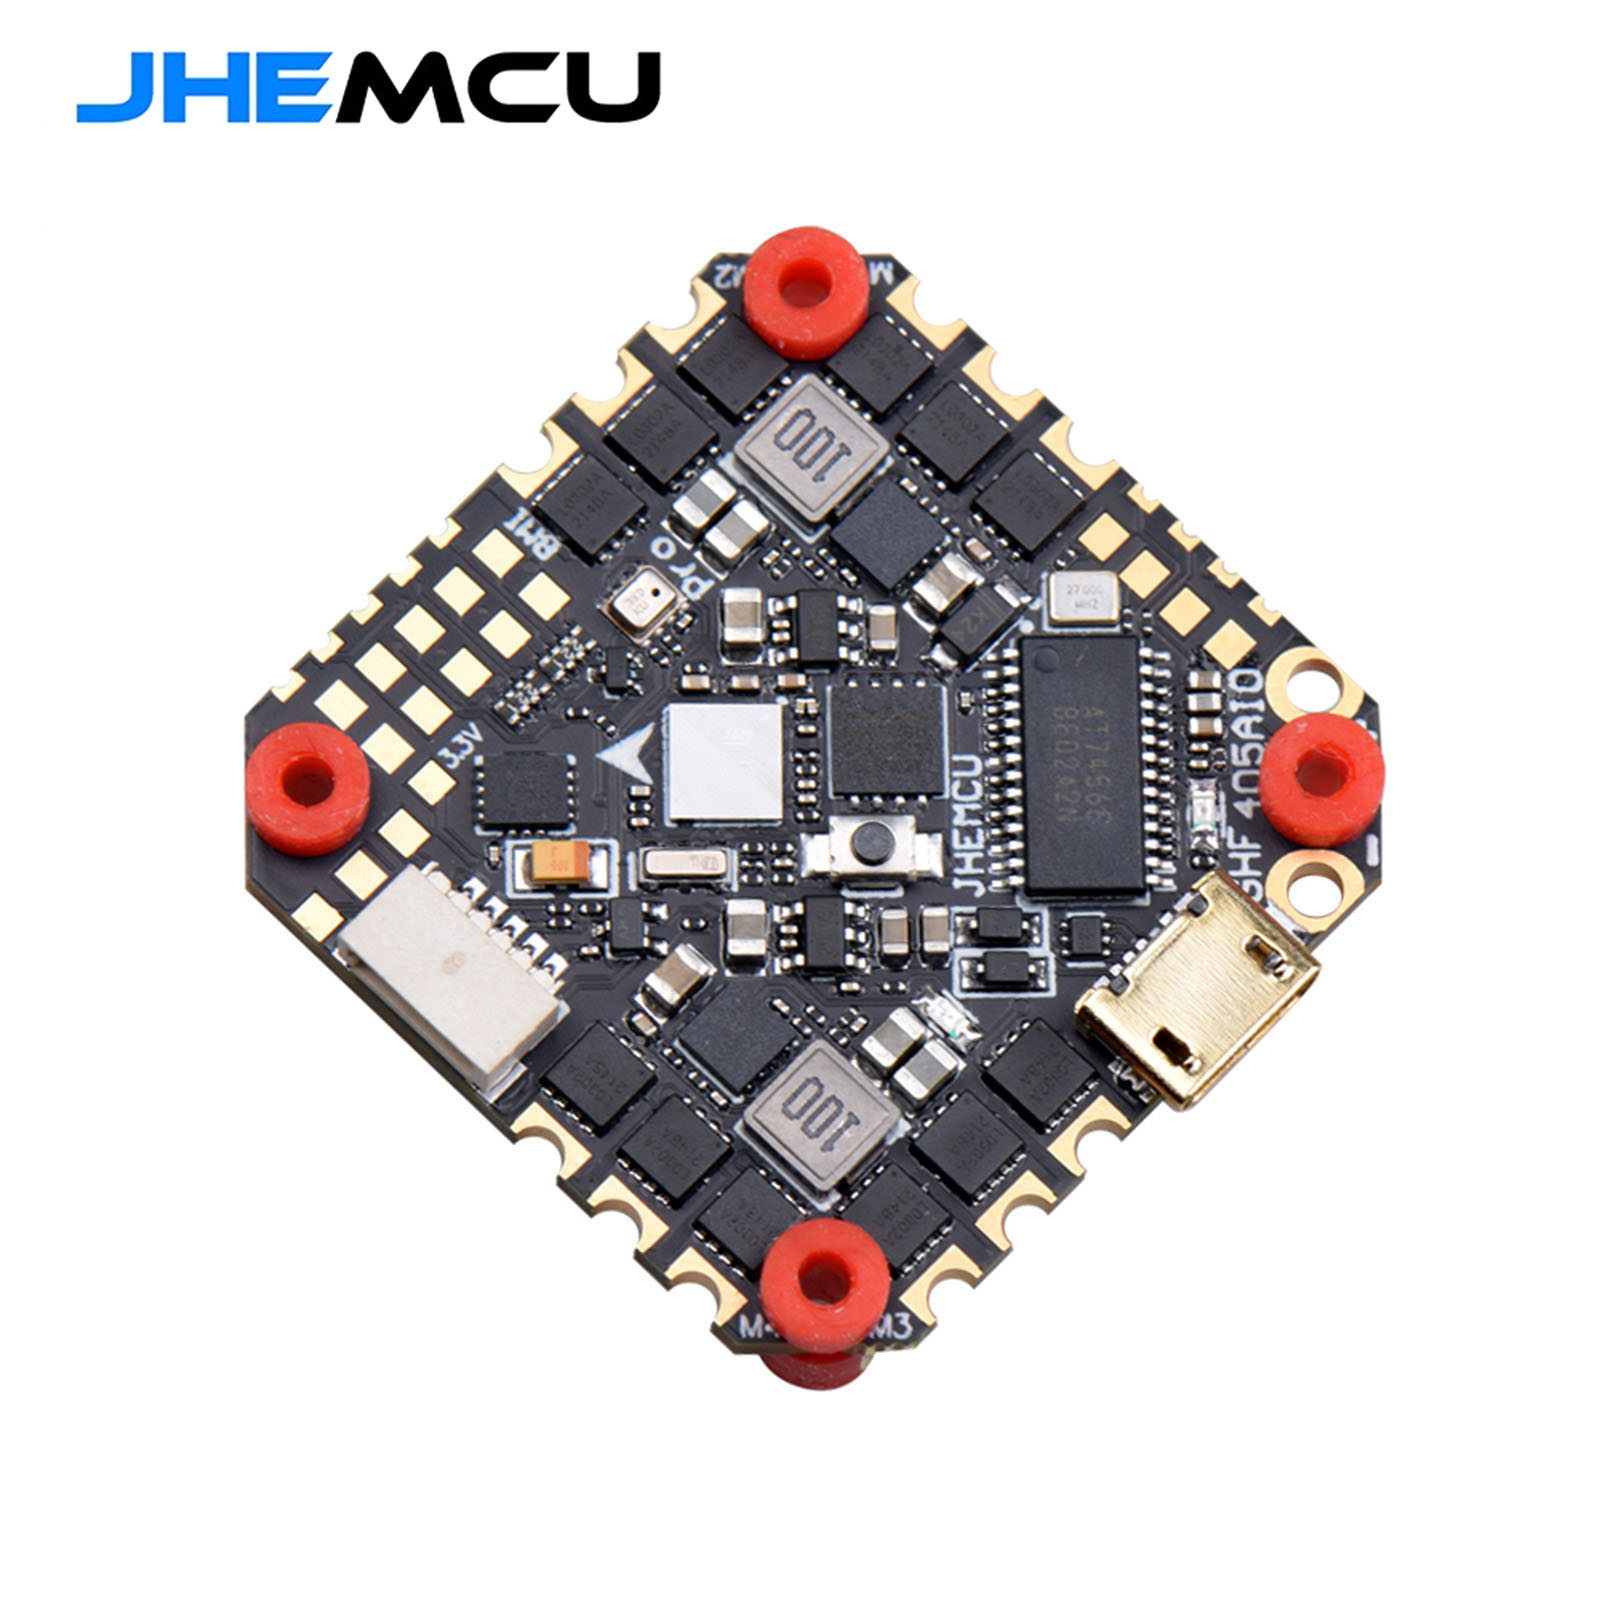 JHEMCU GHF405AIO-BMI F405 Flight Controller W5V 10V BEC Built-in 40A BLHELI_S 2-6S 4 in 1 ESC 25.5X25.5mm for - image 2 of 7